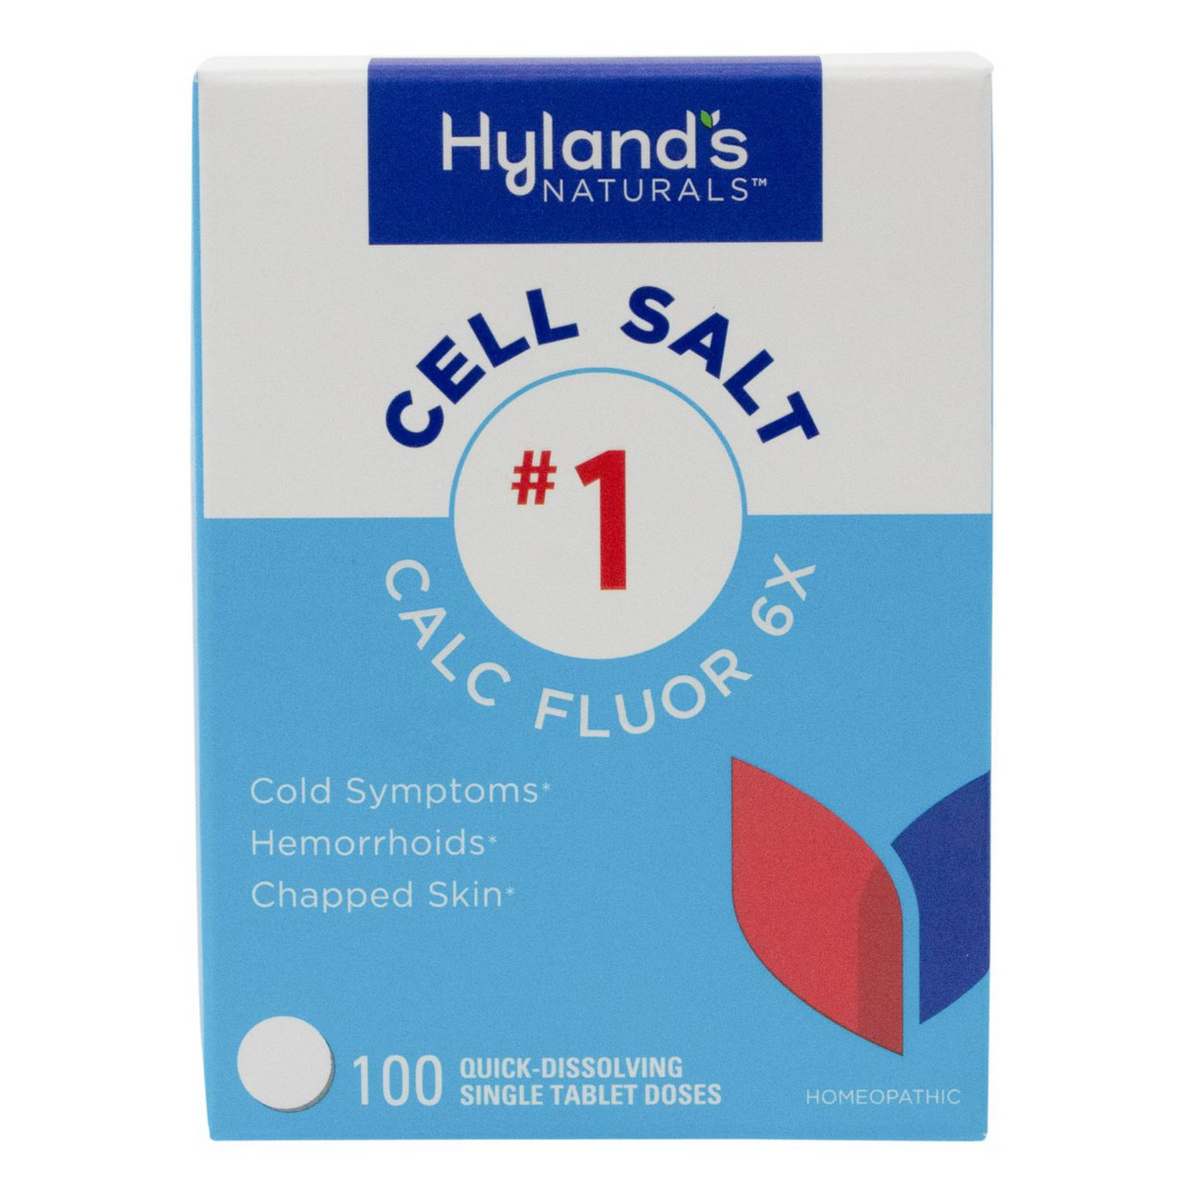 Primary Image of Cell Salt Calc Fluor 6x Tablets